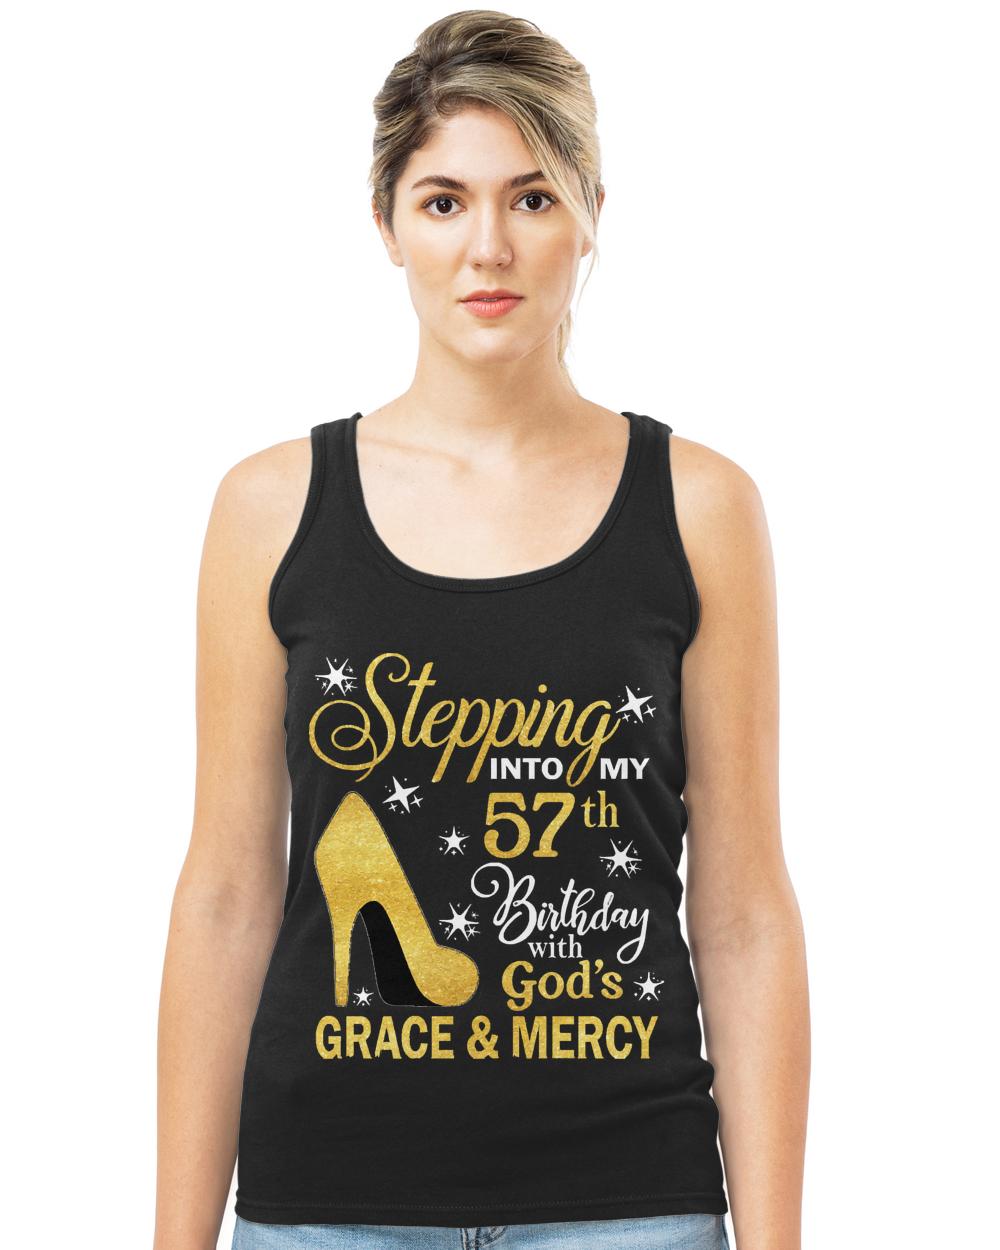 57th Birthday T-ShirtStepping Into My 57th Birthday With God's Grace & Mercy Bday T-Shirt (16)